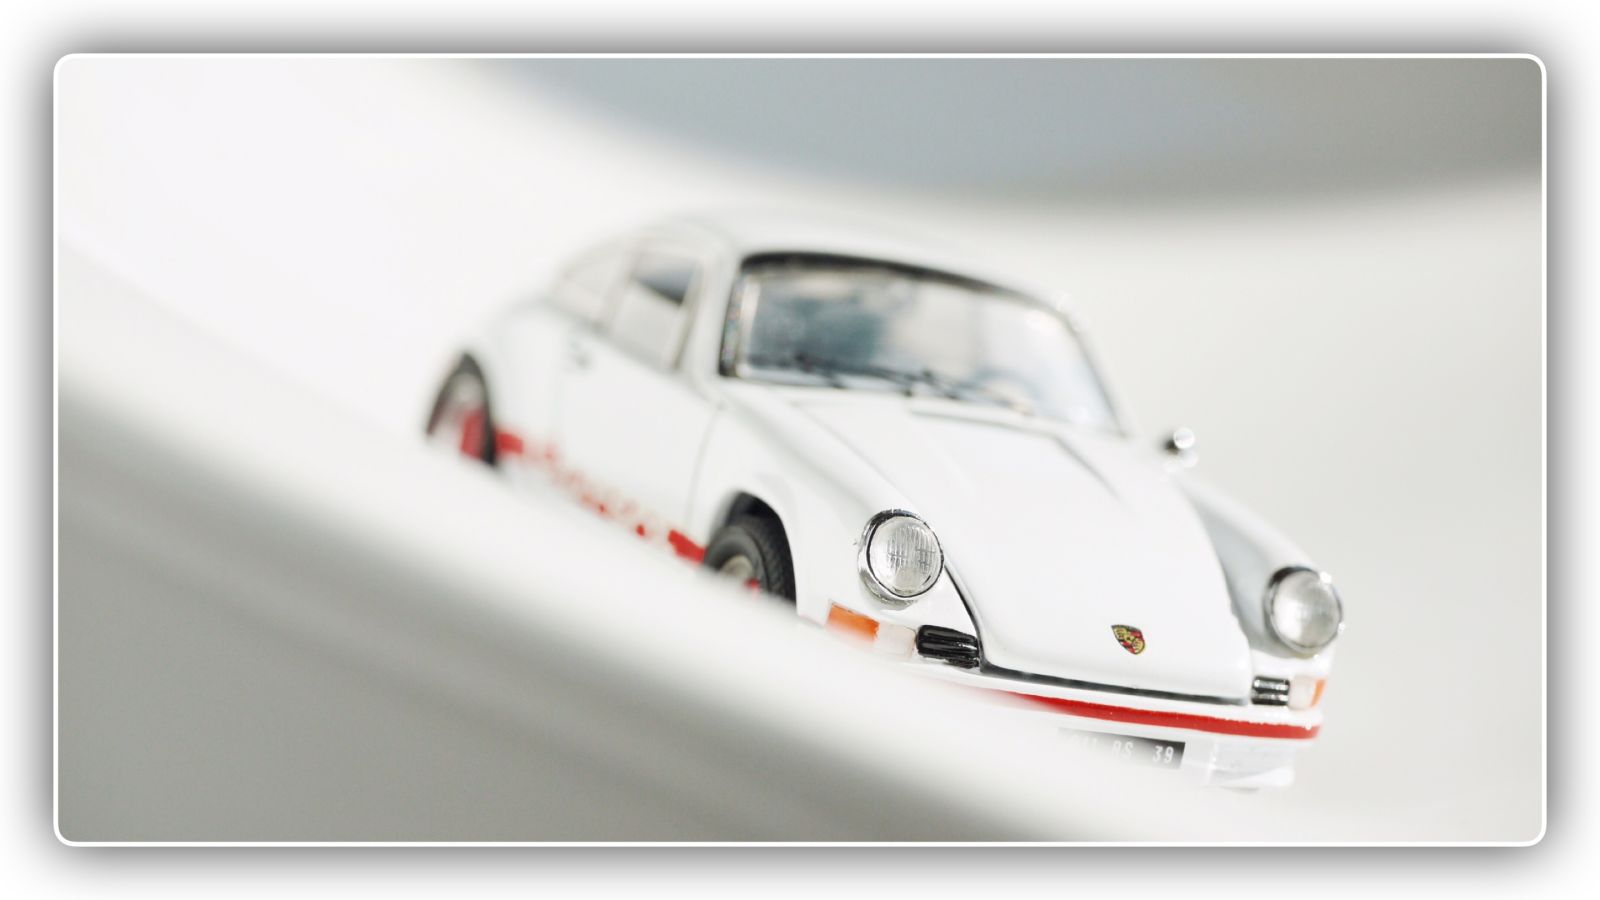 Illustration for article titled LaLD Car Week: Teutonic Tuesday - 1/43 Jouef Evolution 1973 Carrera RS 2.7